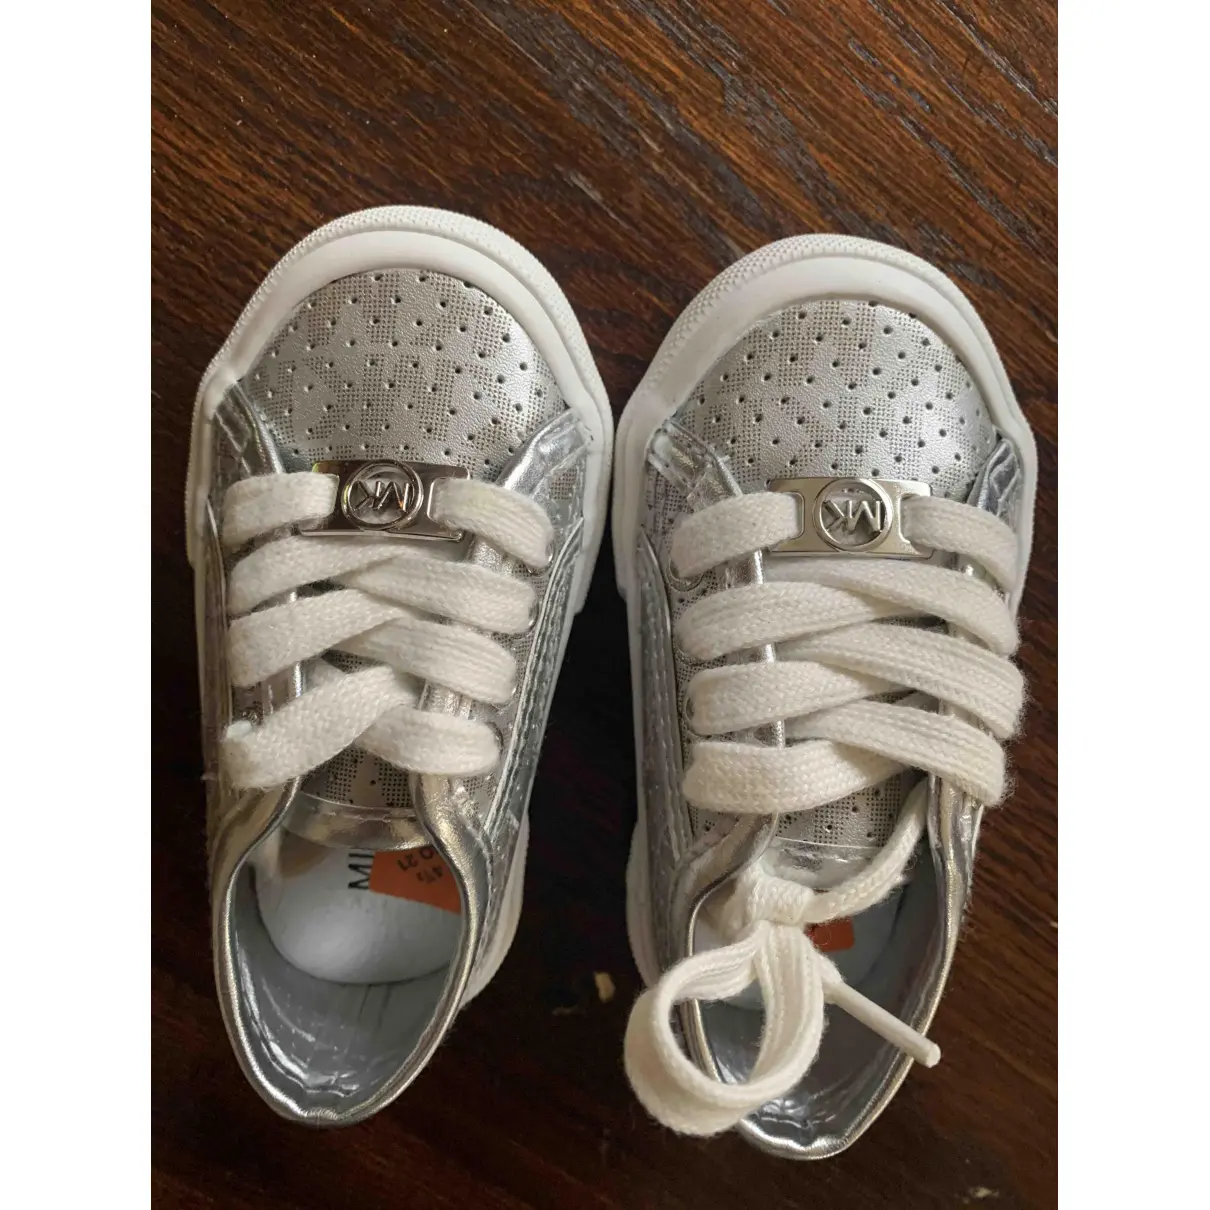 Patent leather trainers Michael Kors